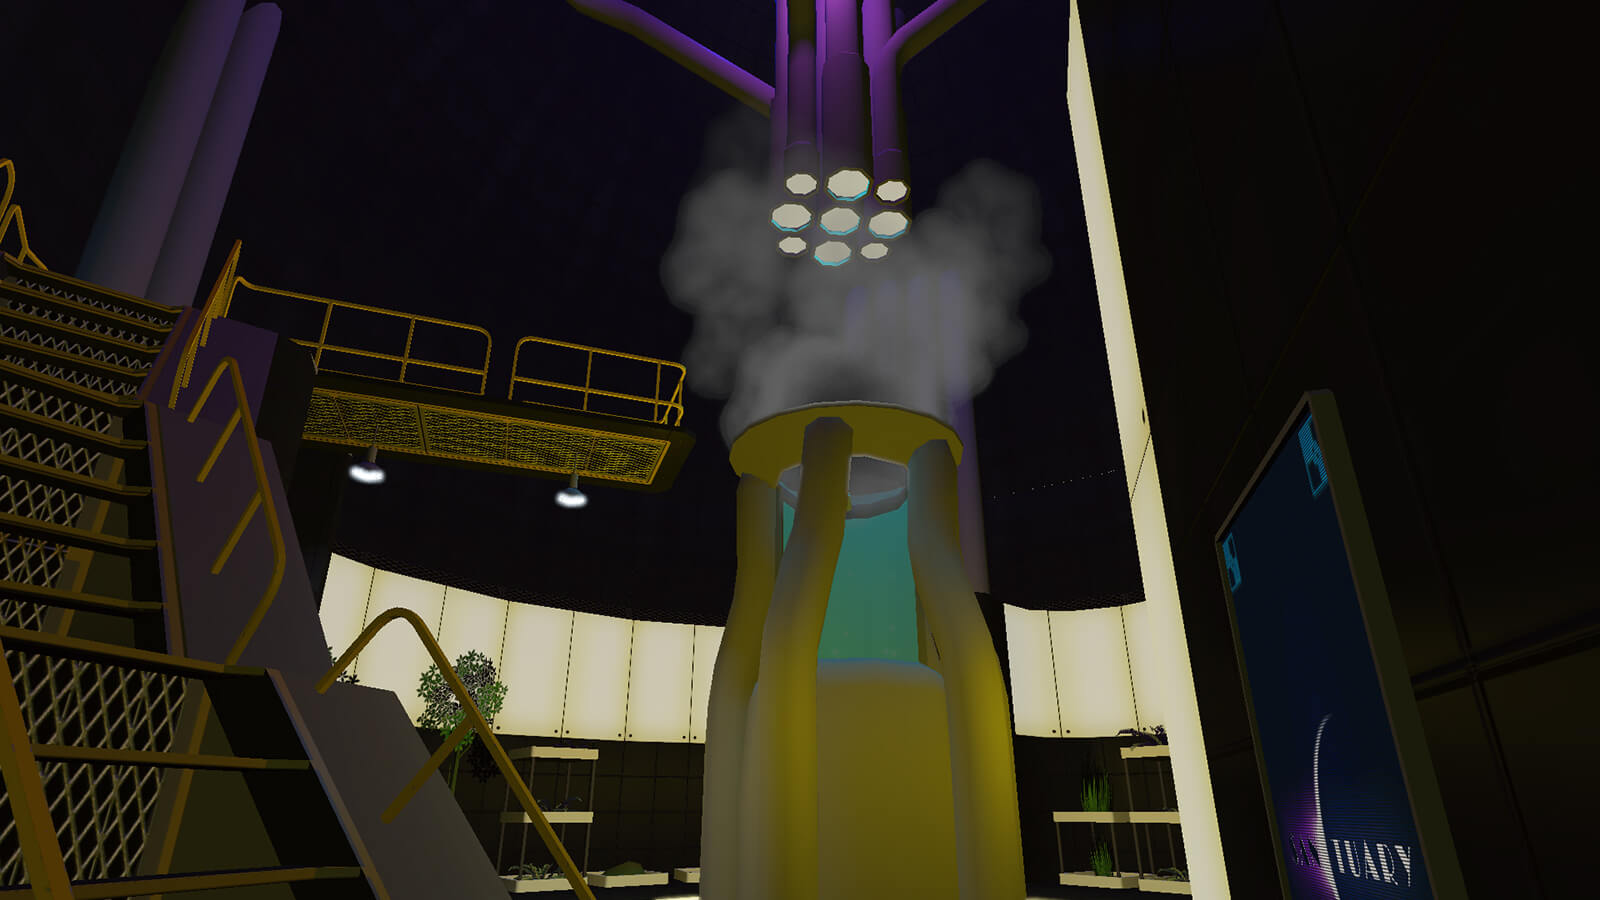 Industrial stairs lead up to a steaming, yellow-and-purple mechanism dominating the center of a cylindrical room.